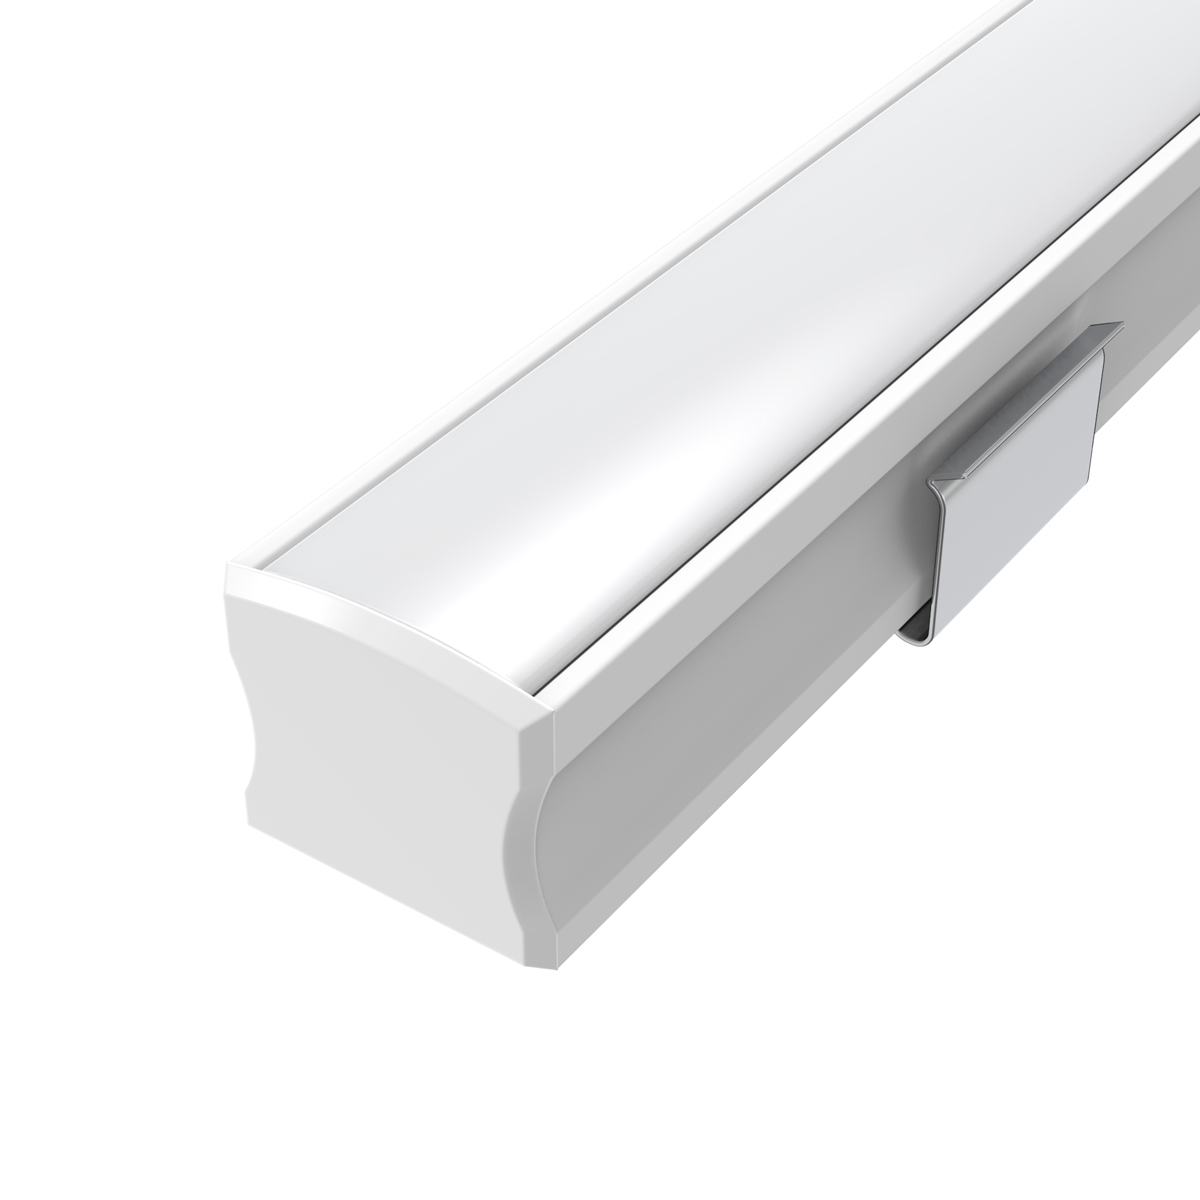 View 2m White 15mm LED Aluminium Profile With Frosted Cover information